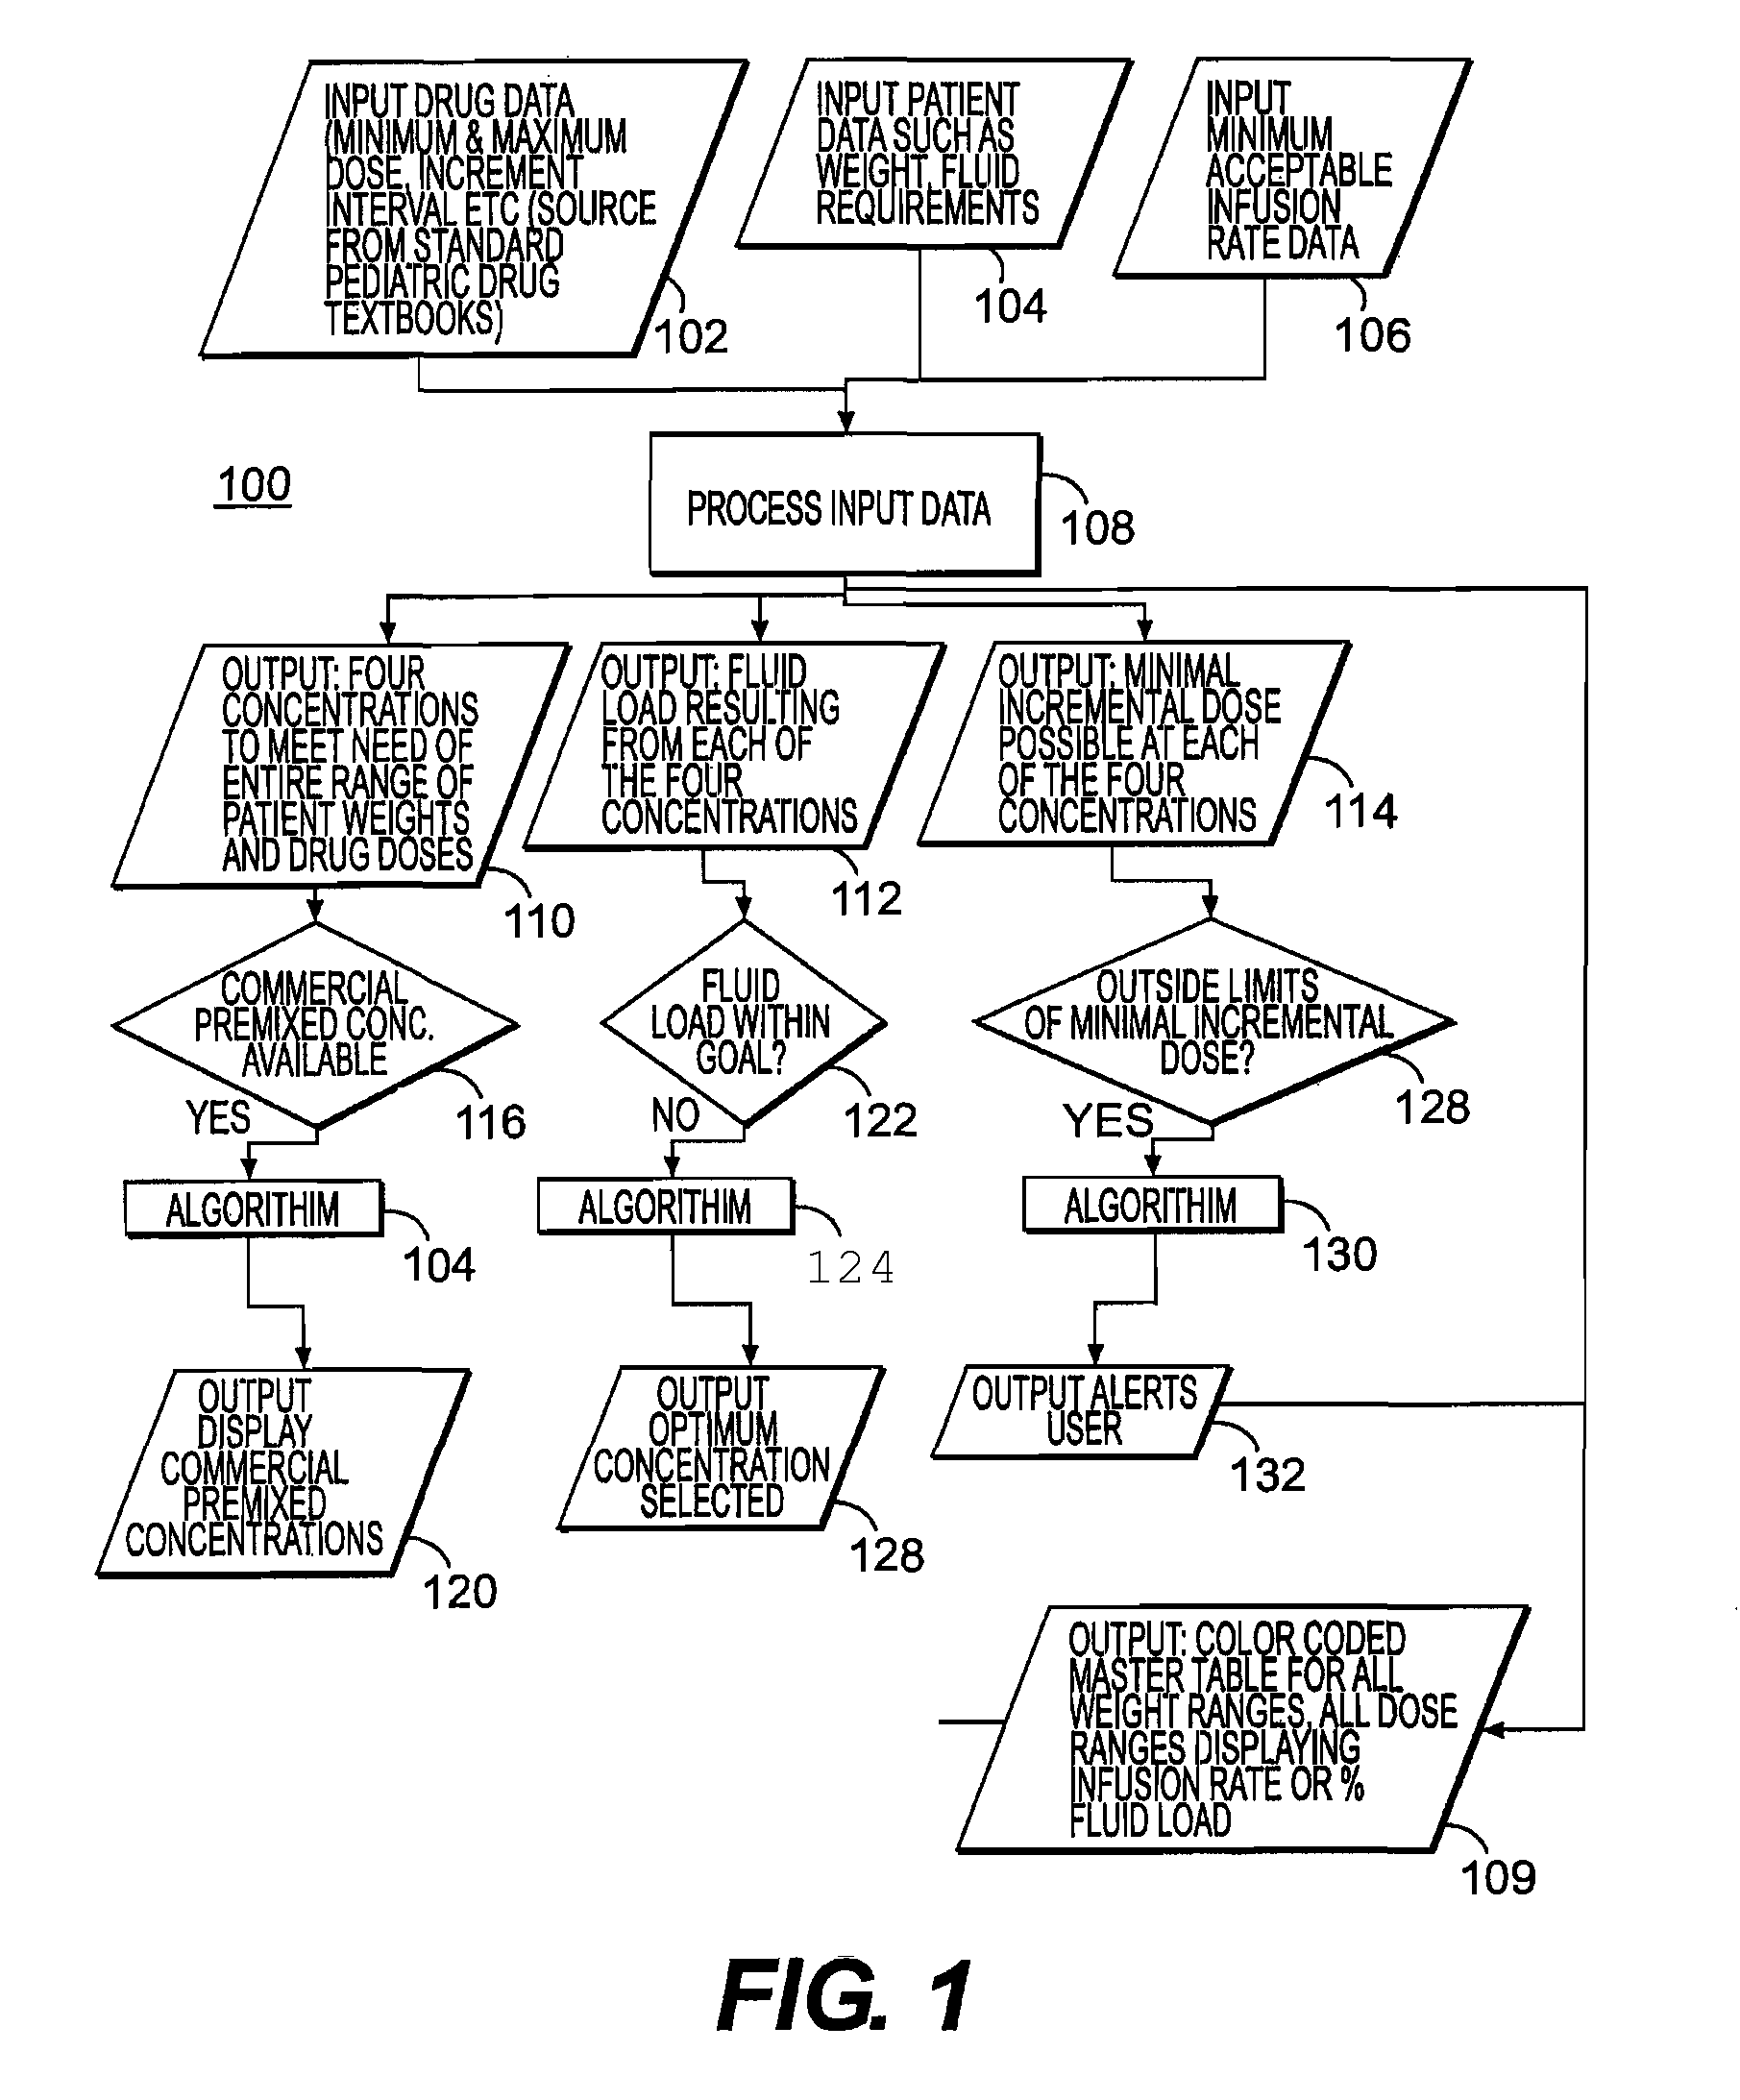 Apparatus and method for providing optimal concentrations for medication infusions